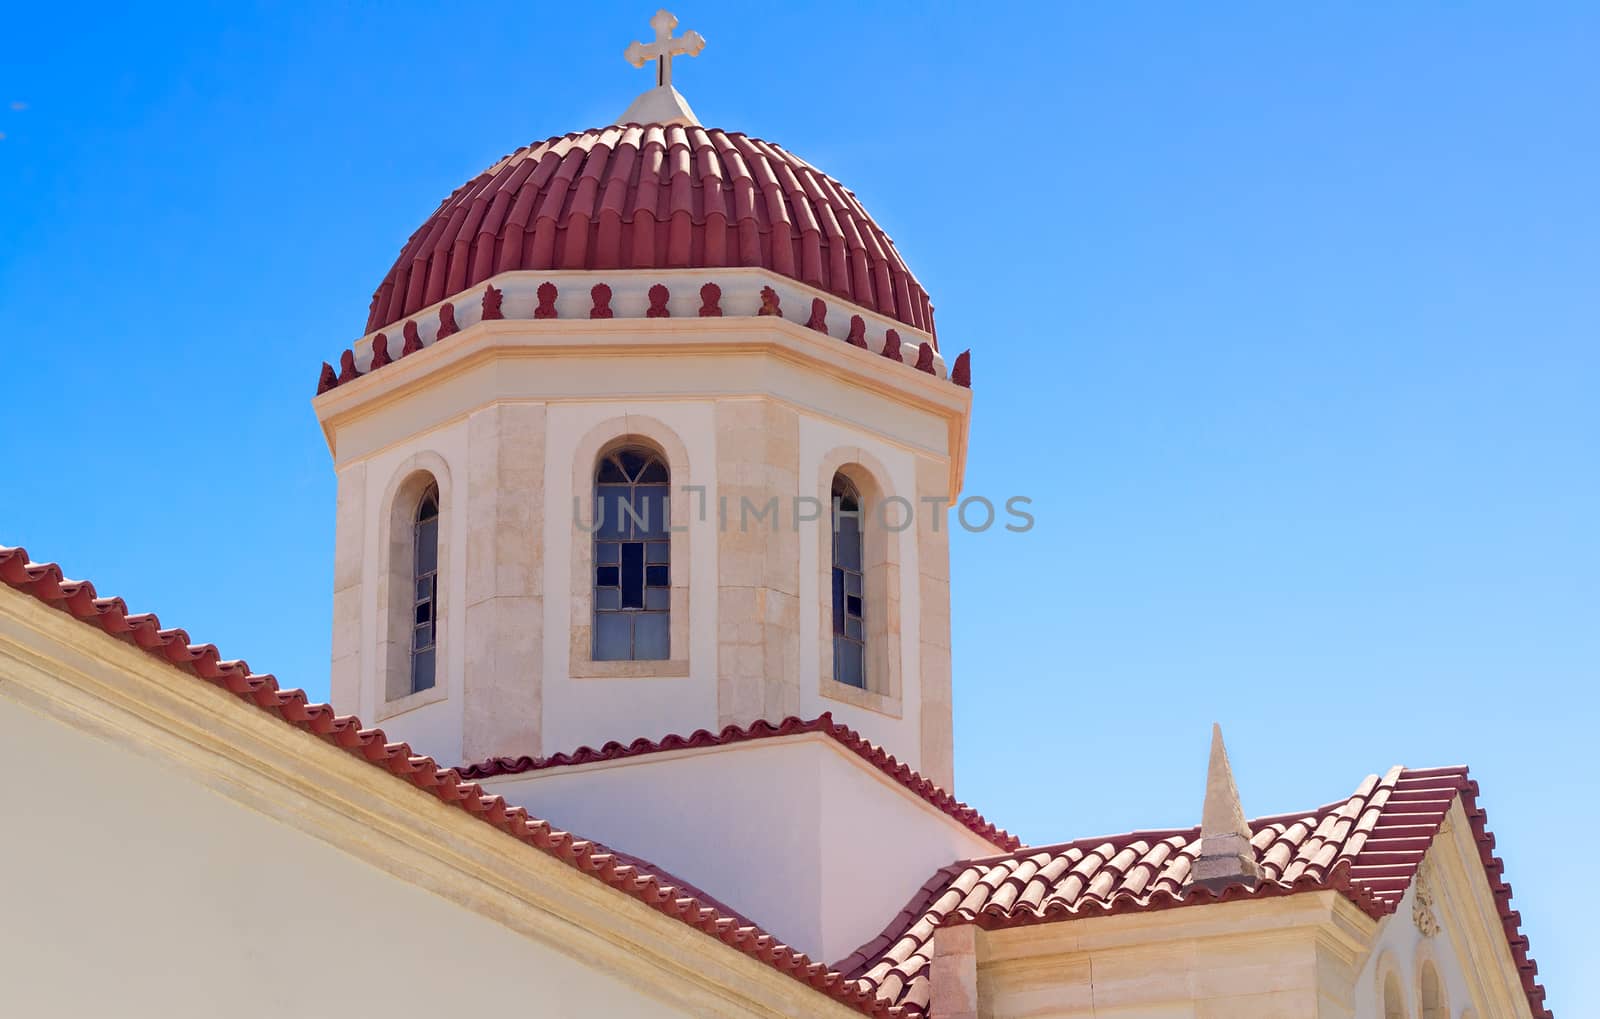 Dome and the top part of church of Saint Varvara on the island of Crete. Are presented against the blue sky.